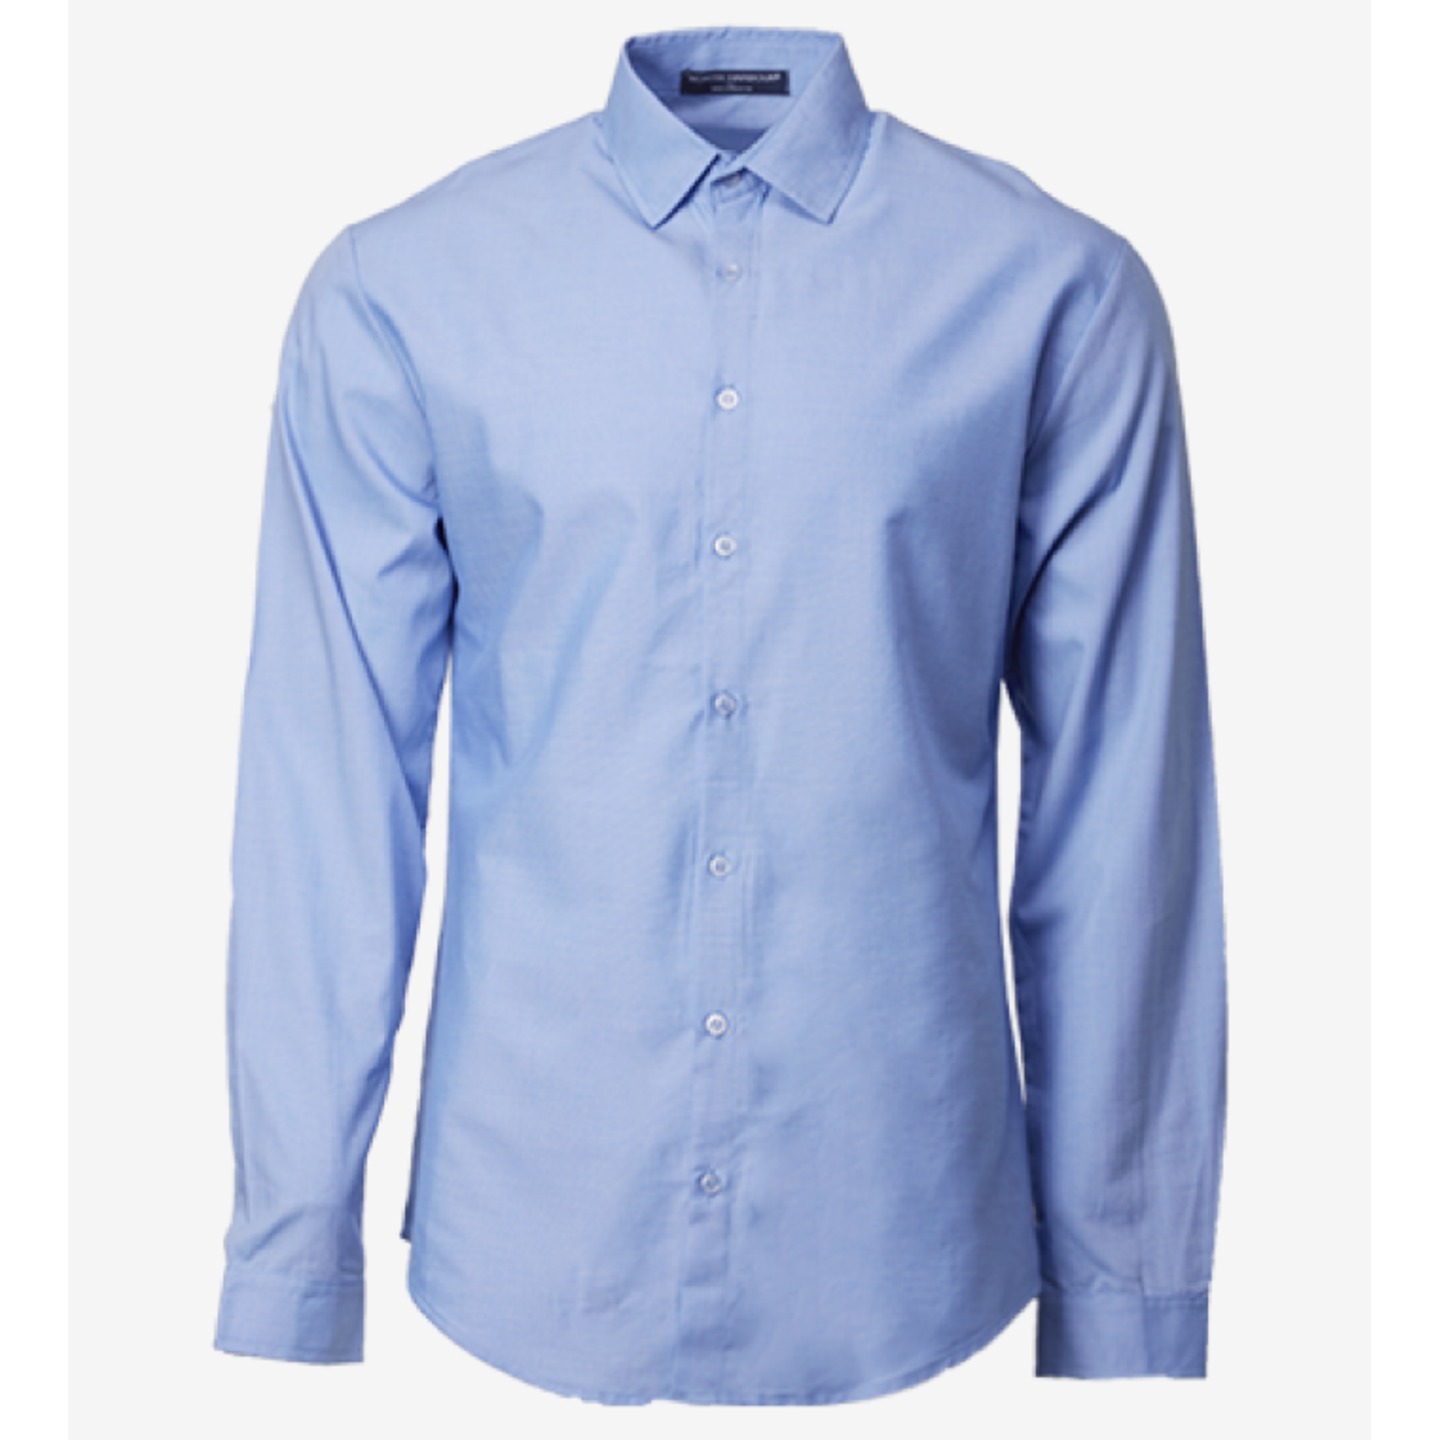 North Harbour Cotton Rayon Shirt